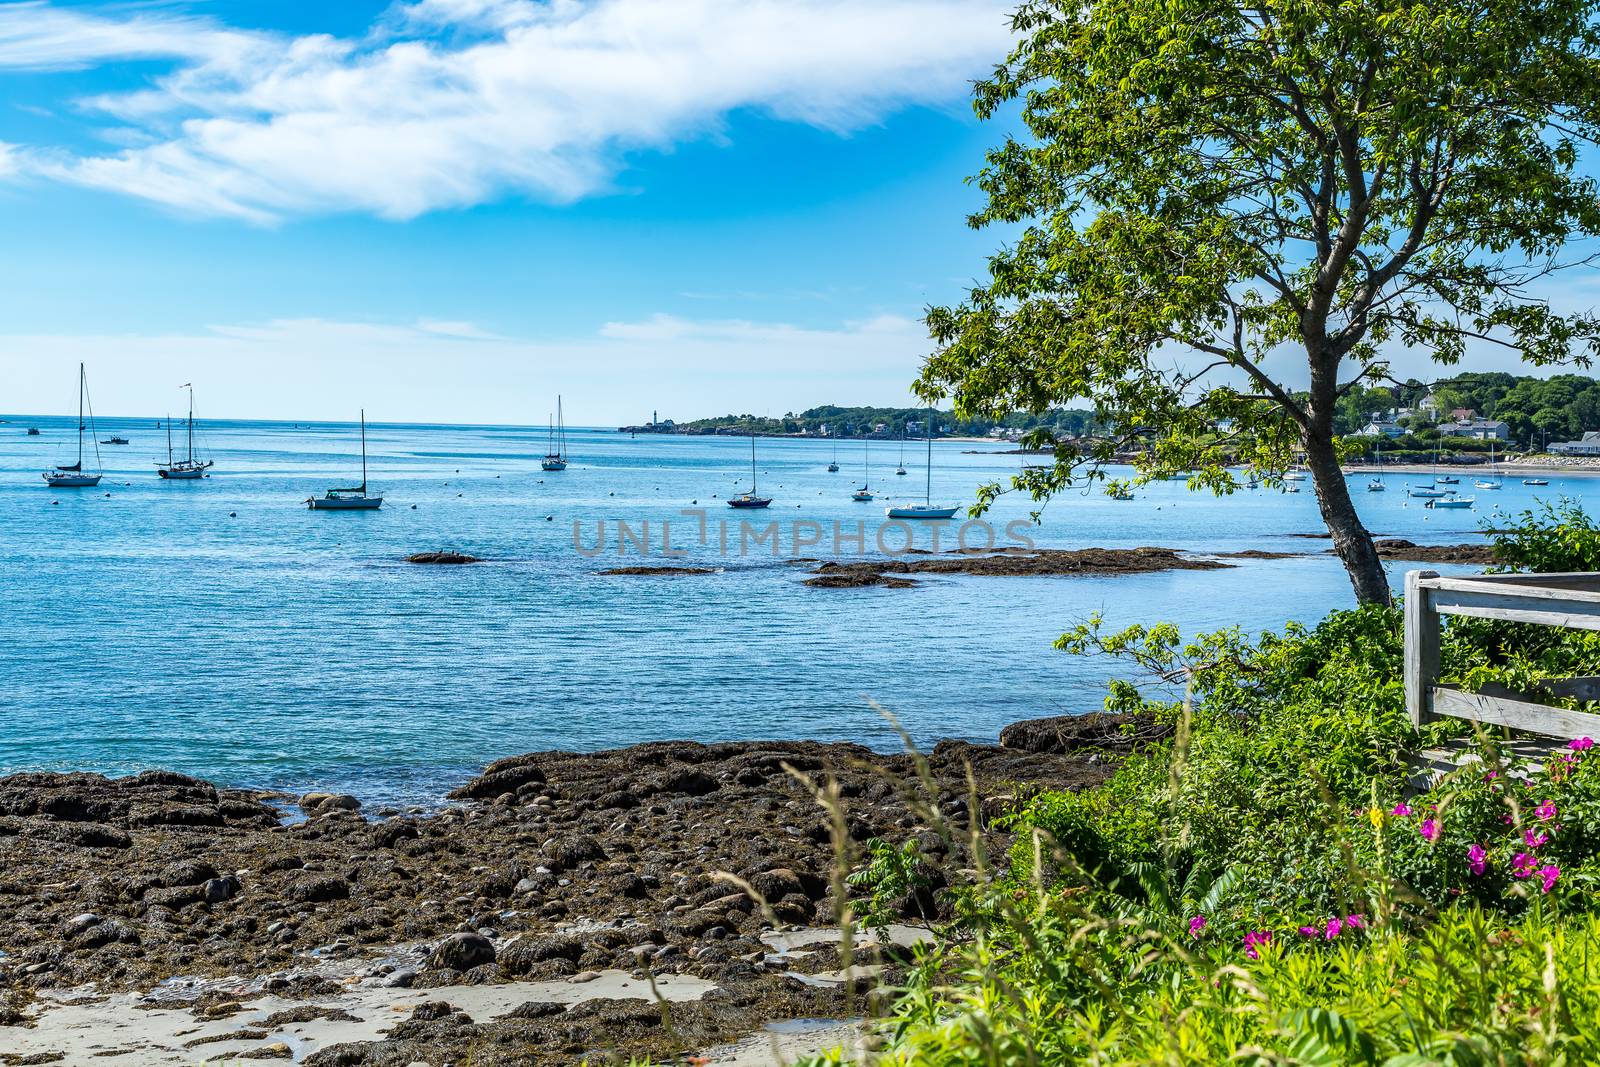 Looking across Simonton Cove from the Southern Maine Community College Campus in South Portland. Portland Head Light is in the distance.